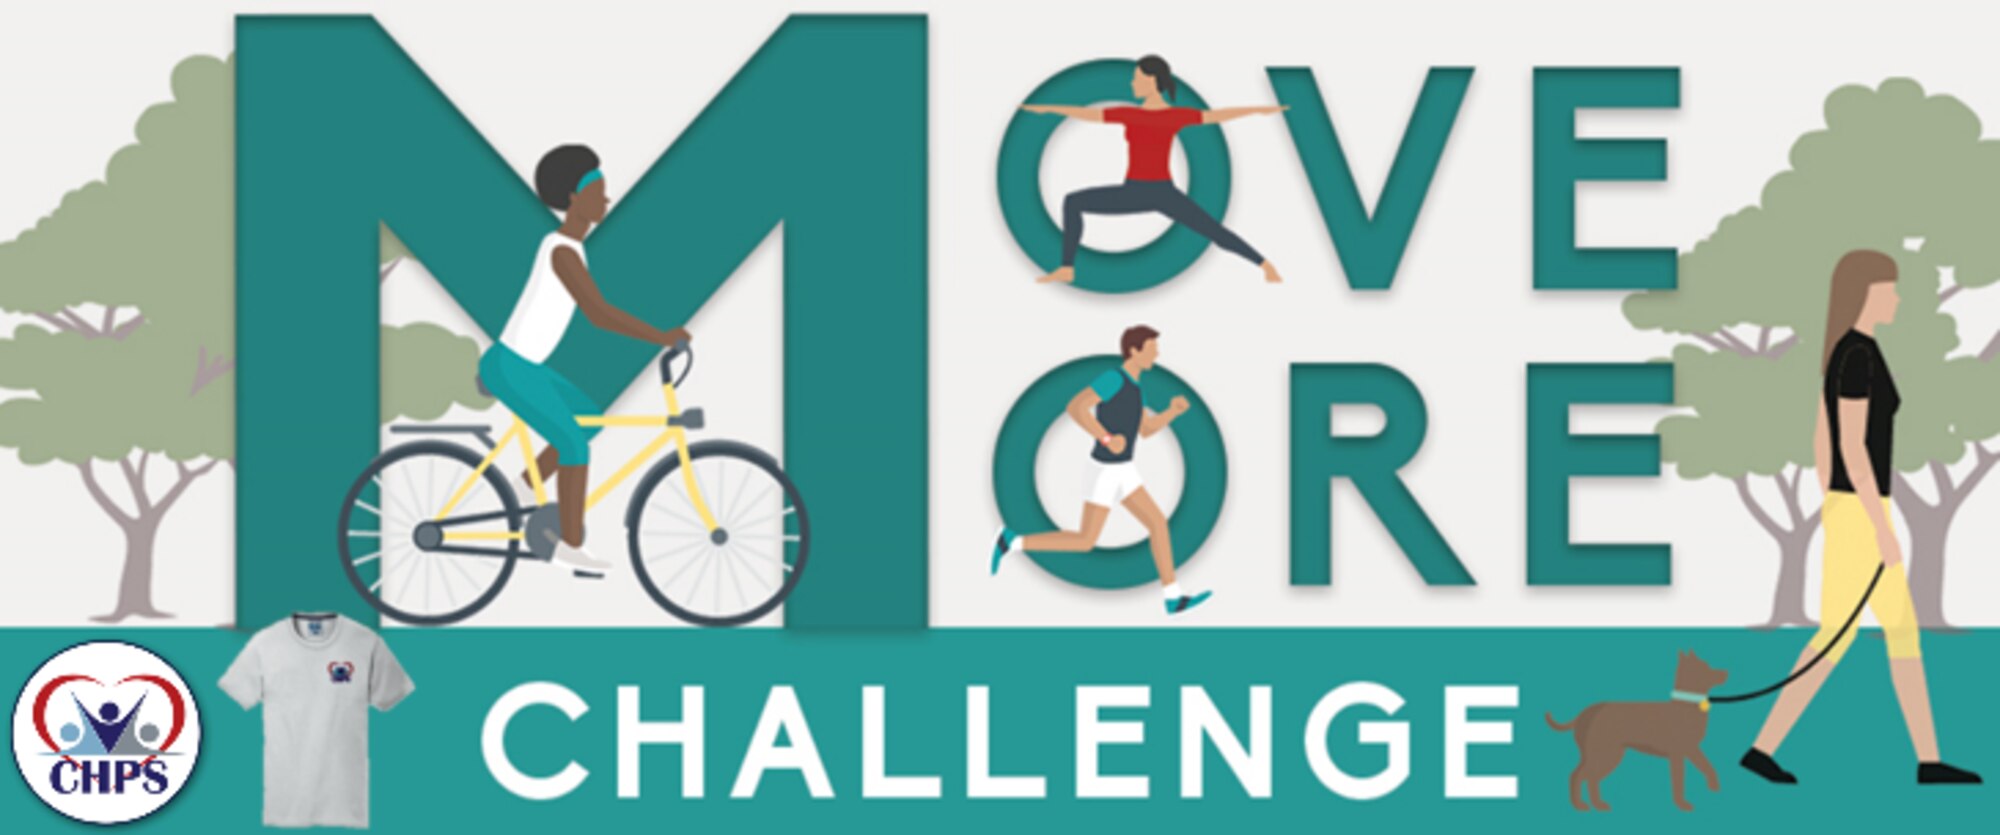 Improve the way you feel and function by participating in the Air Force Move More Challenge. During September and October, Civilian Health Promotion Services will promote and conduct its Move More physical activity challenge. Being physically active is essential to prevent and reduce risks of many diseases and improve physical and mental health. Participants will receive a FREE CHPS performance training t-shirt at the initial check-in with CHPS staff.